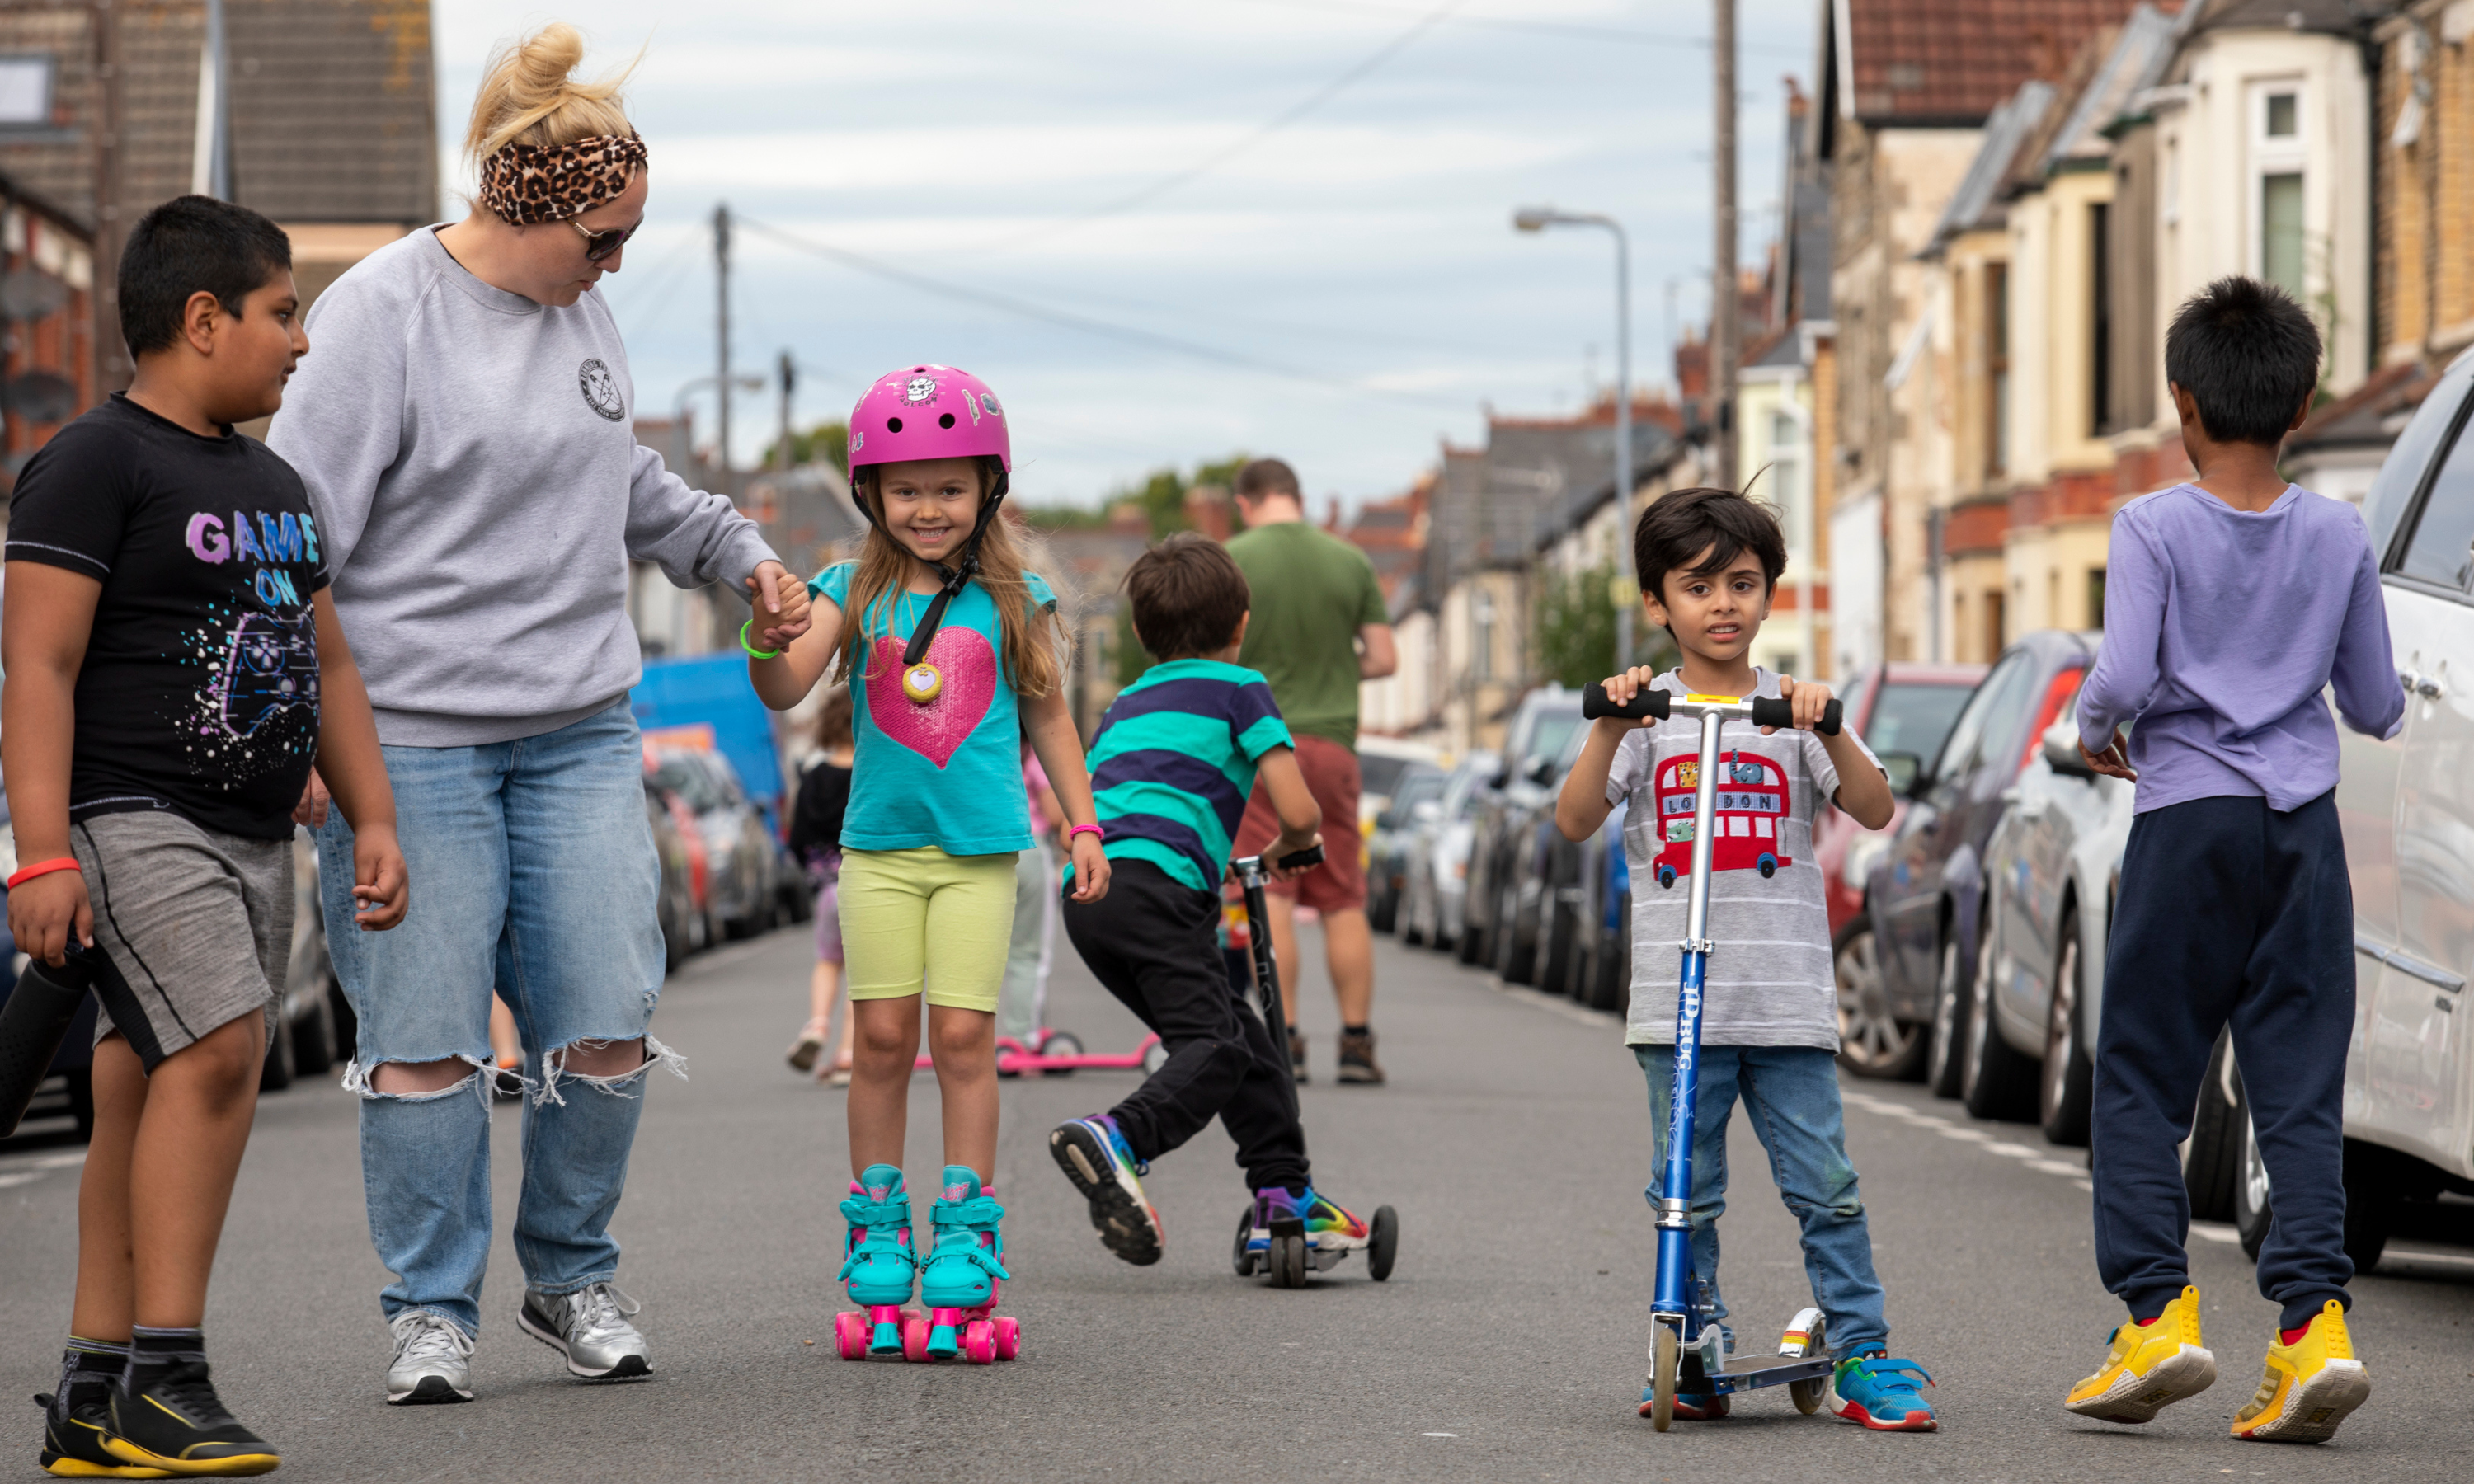 A group of children play on scooters and rollerskates in the street